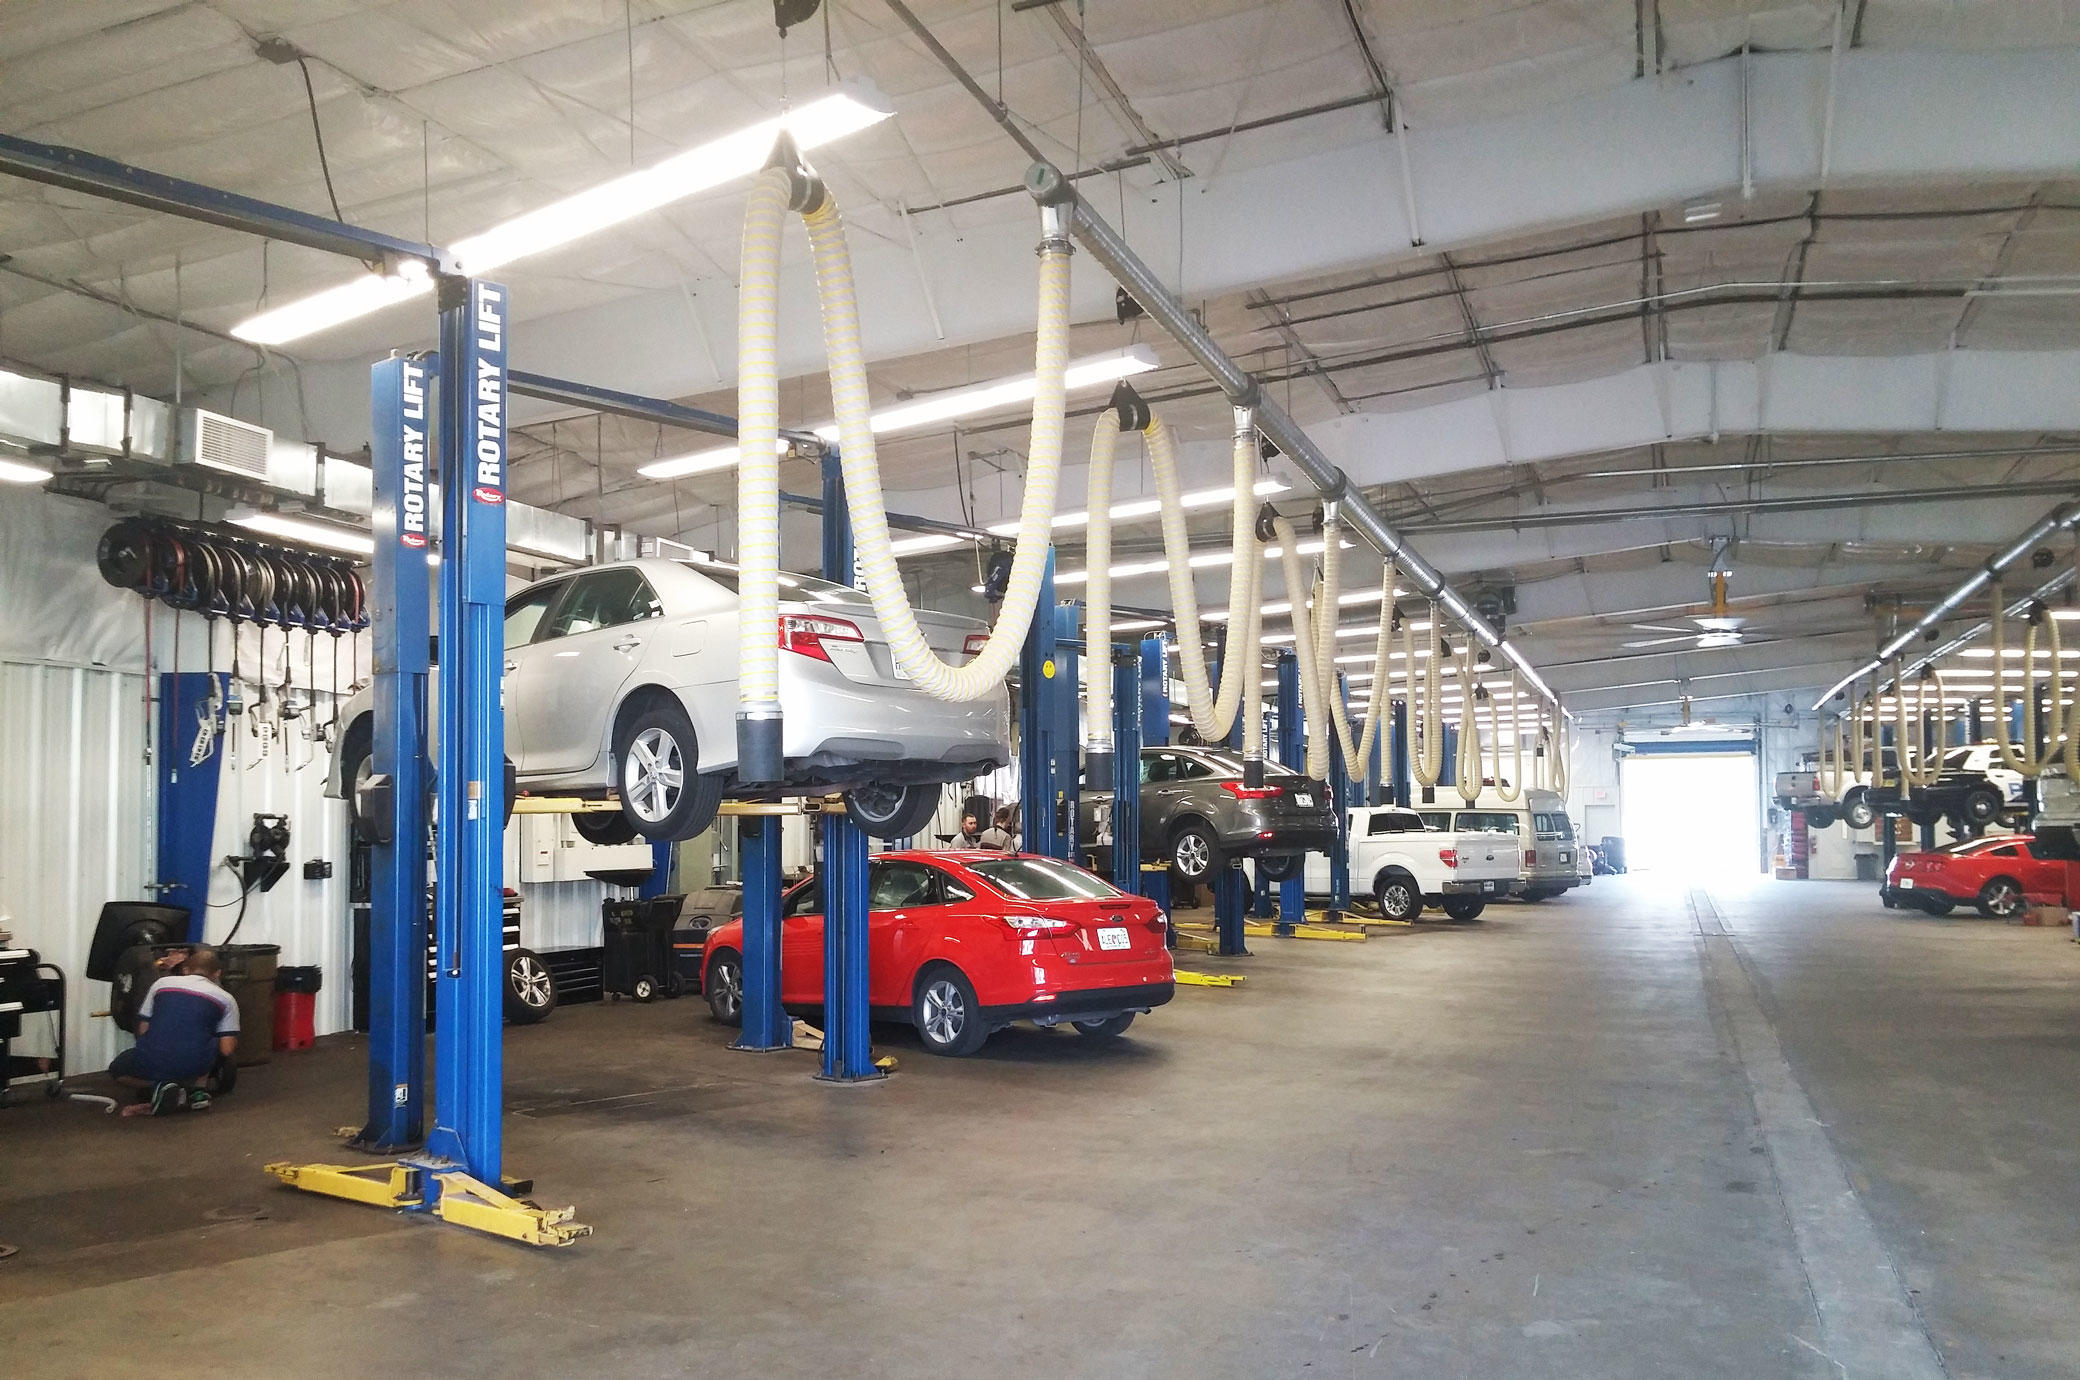 The all New Lakeland Ford Service Center has the latest equipment and technology to diagnose any vehicle with precision and get you back on the road in no time.